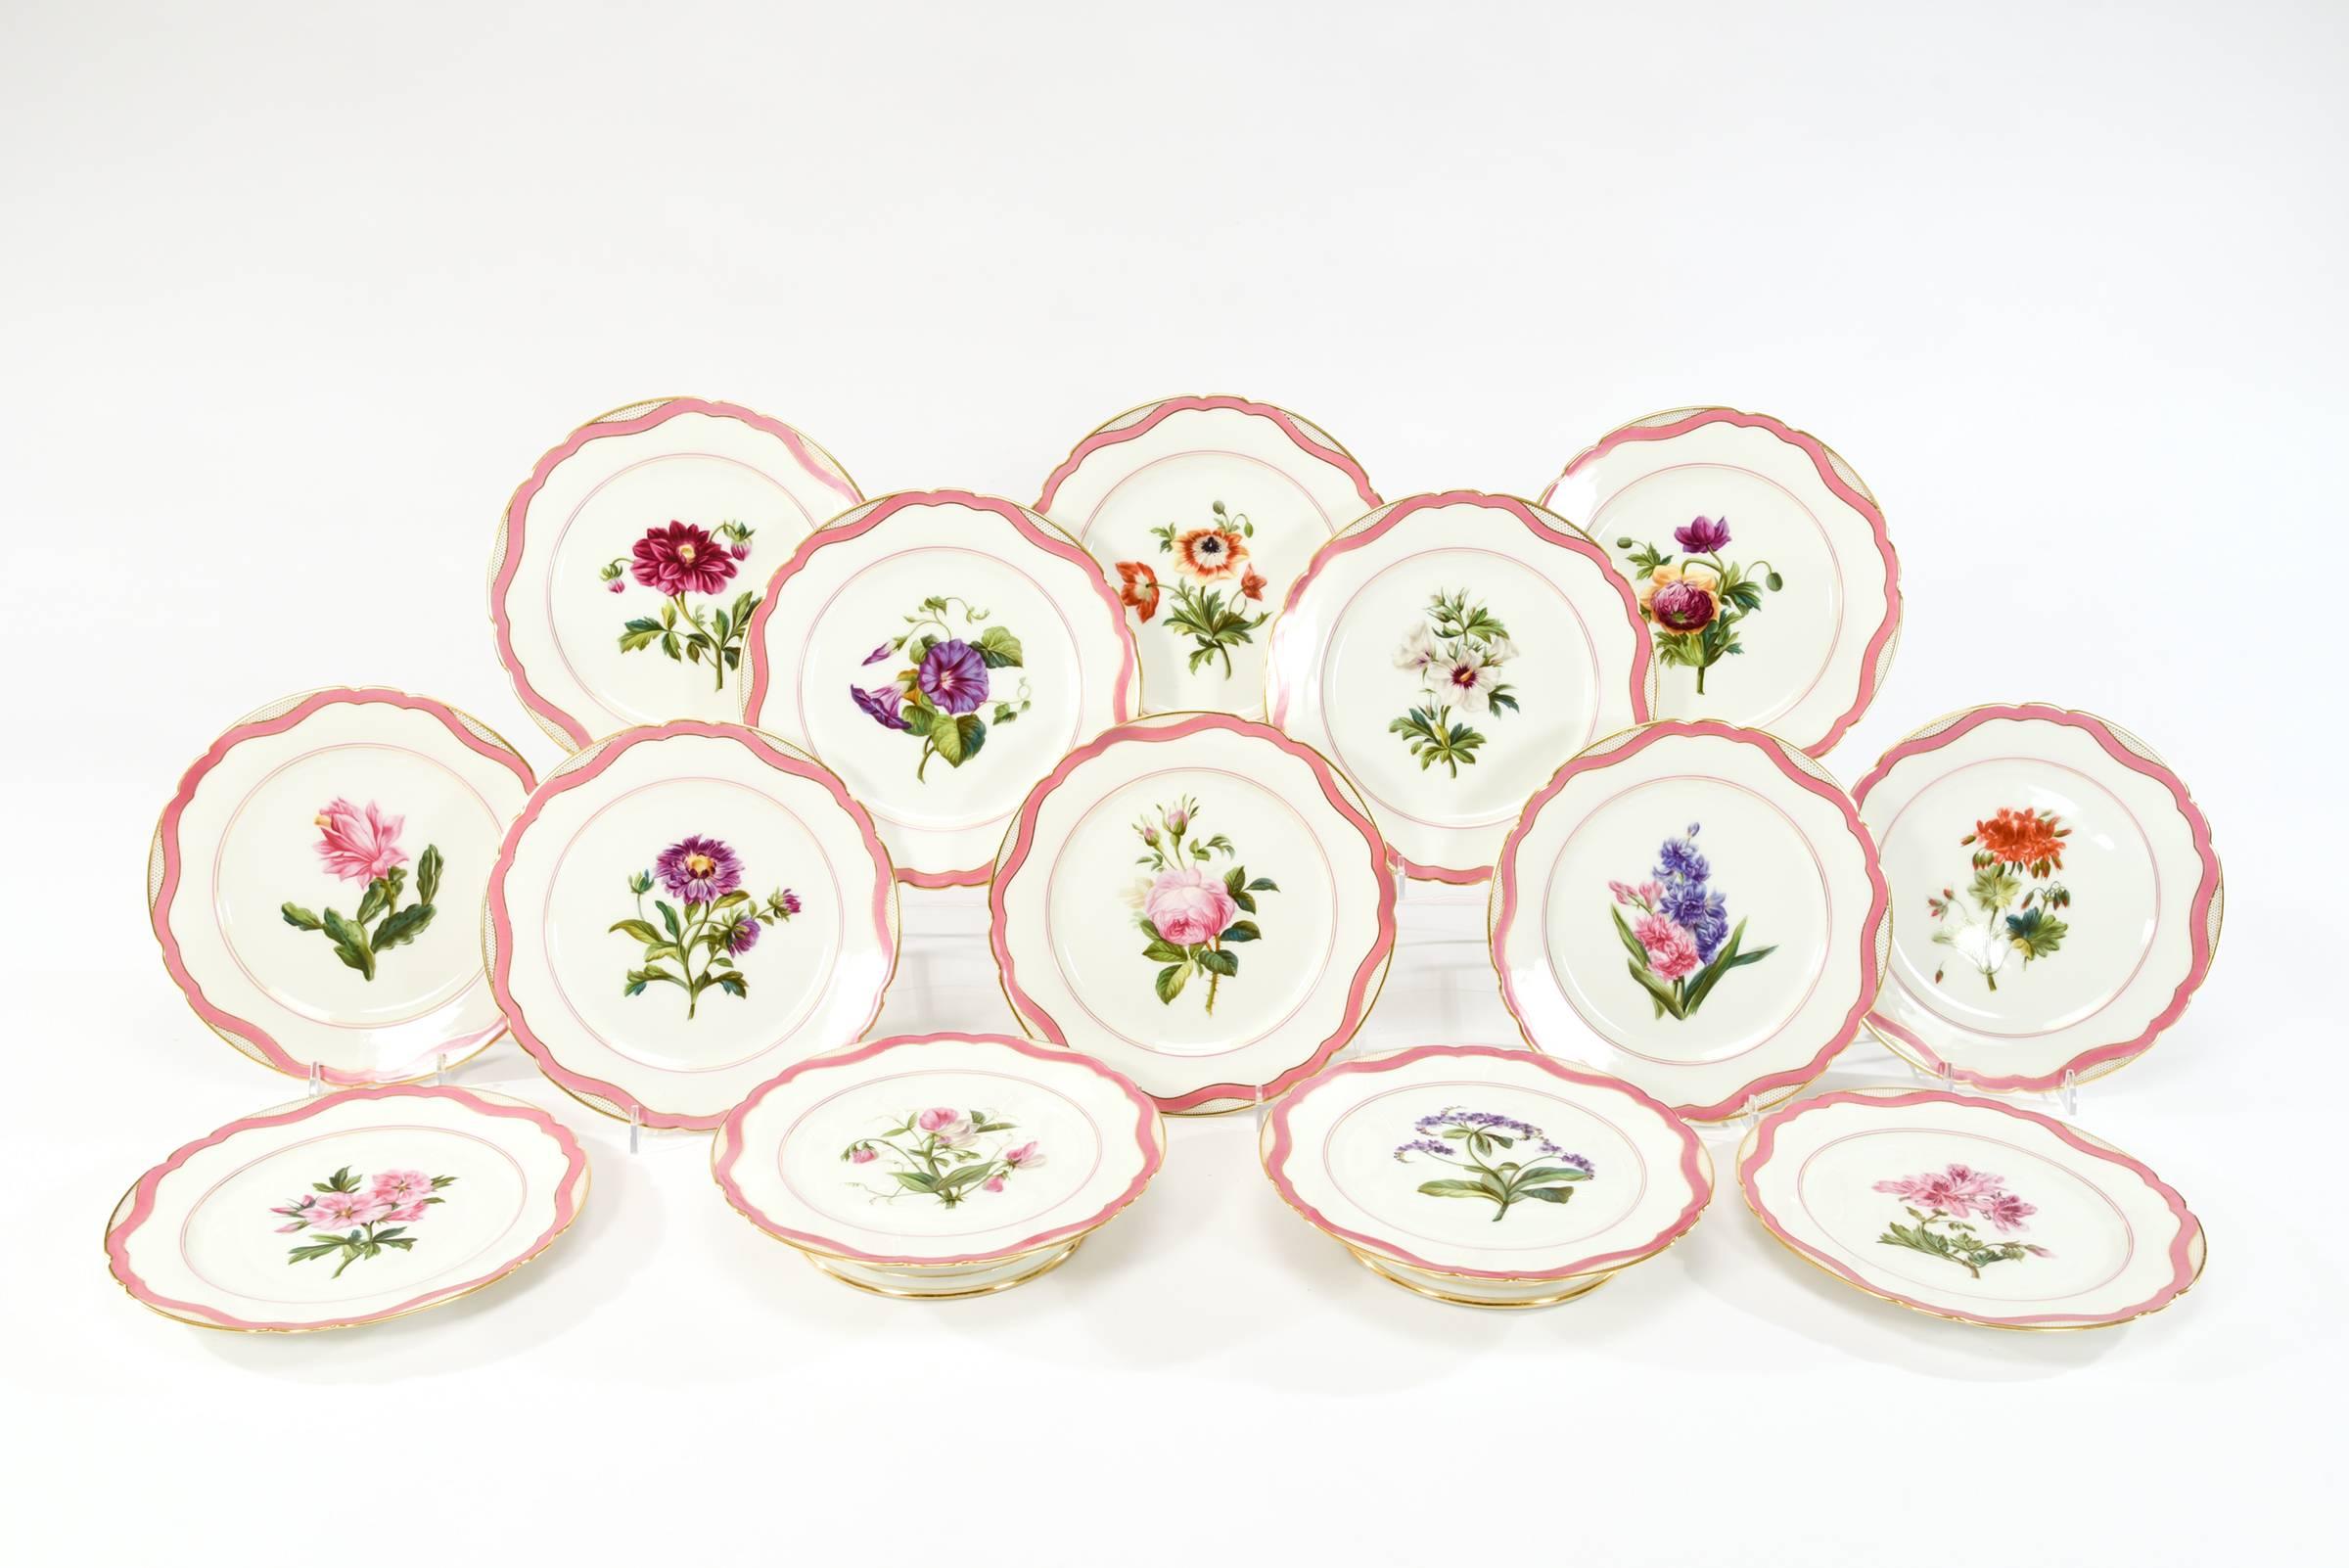 This is an extensive and exquisite 19th century dessert service made by Rihouet, Paris, circa 1820s. Each piece is superbly hand painted with a unique botanical specimen framed by the iconic "Rose DuBarry" ribbon border and trimmed in